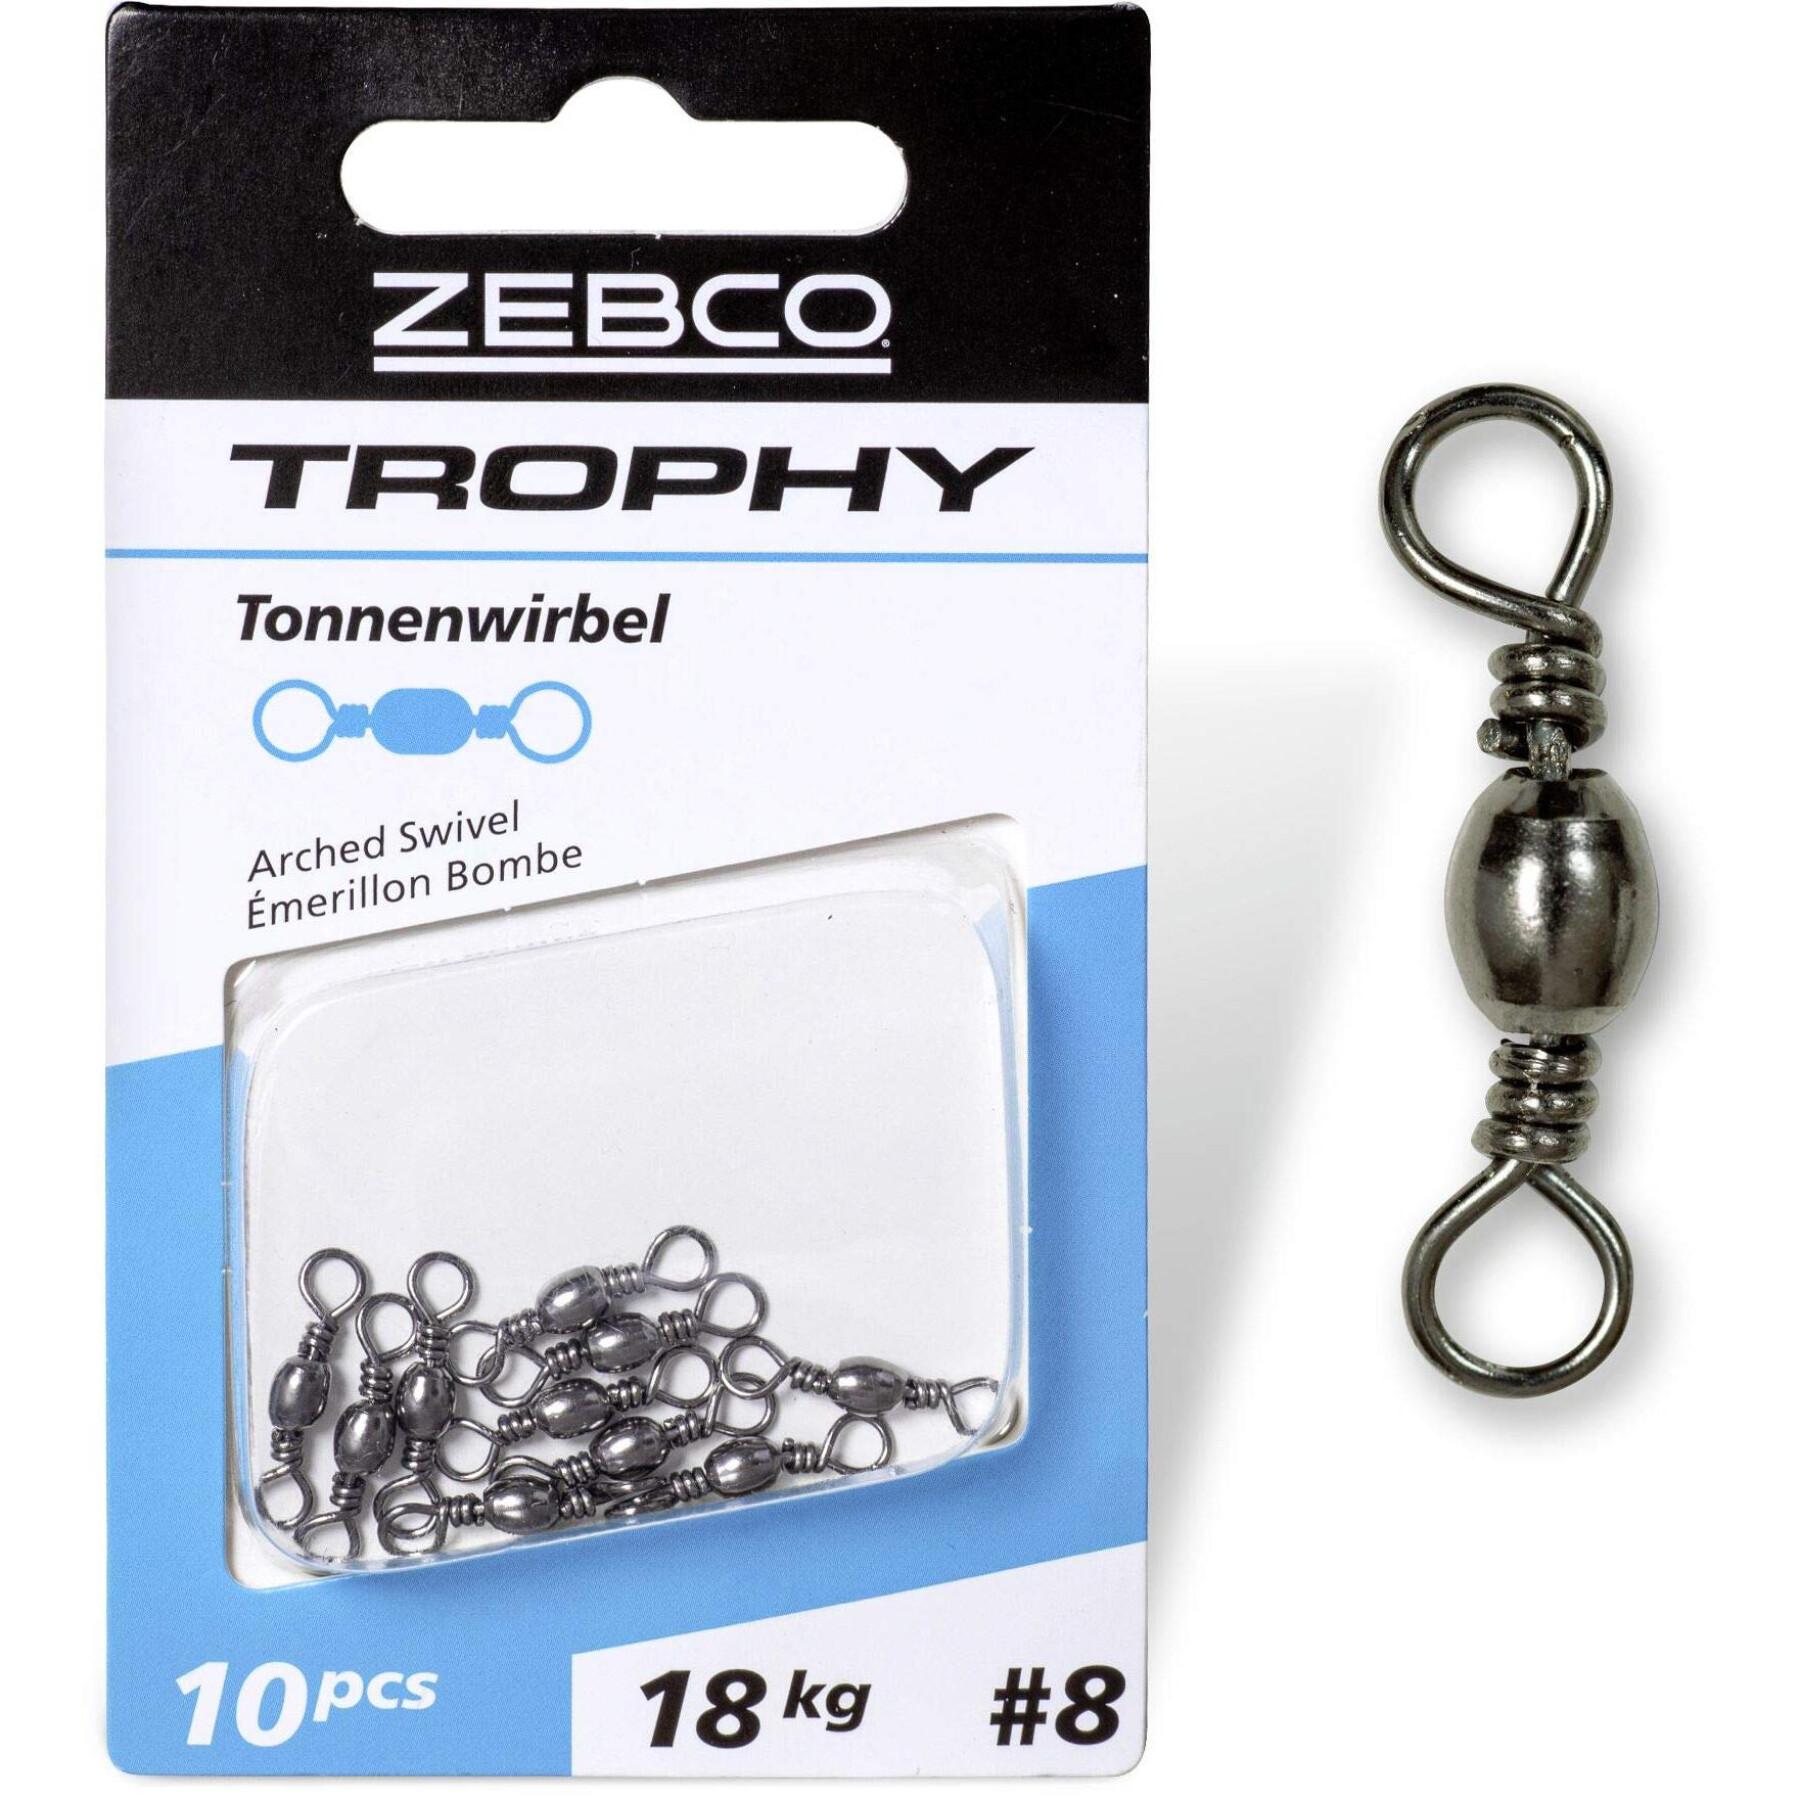 10 pieces of swivels Zebco Trophy Arched